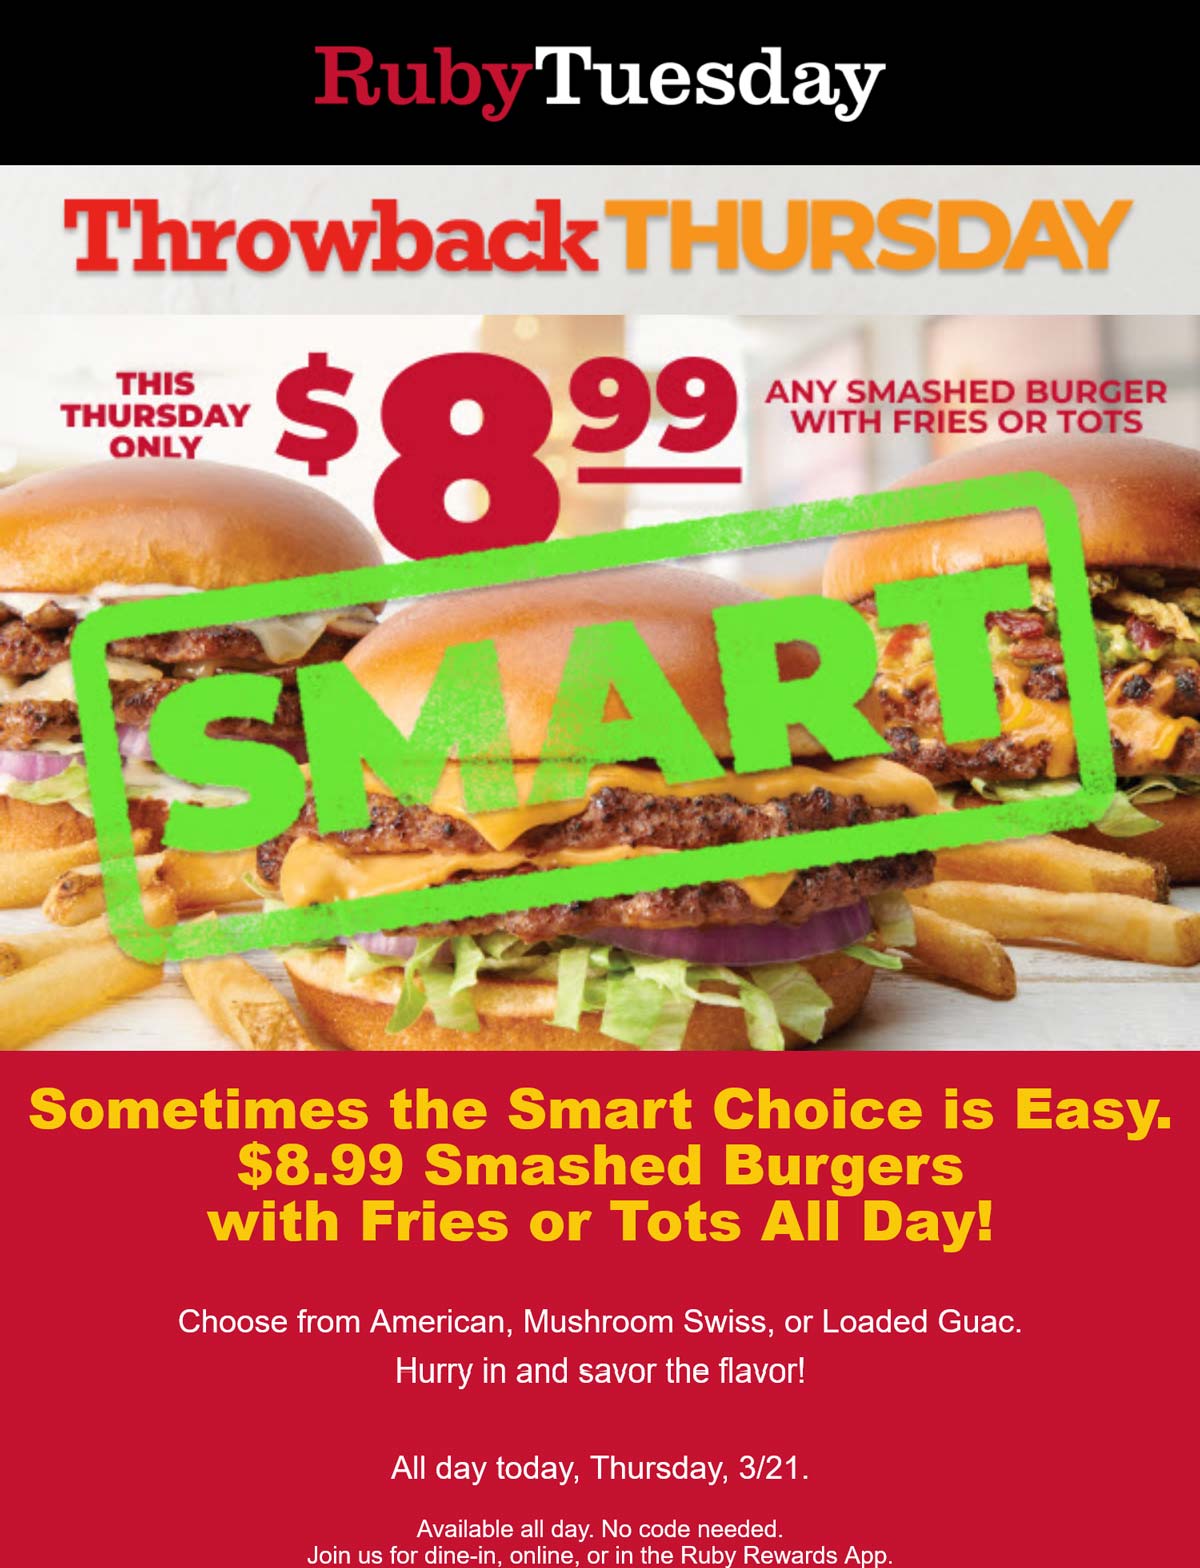 Ruby Tuesday restaurants Coupon  Double cheeseburger + fries = $9 today at Ruby Tuesday #rubytuesday 